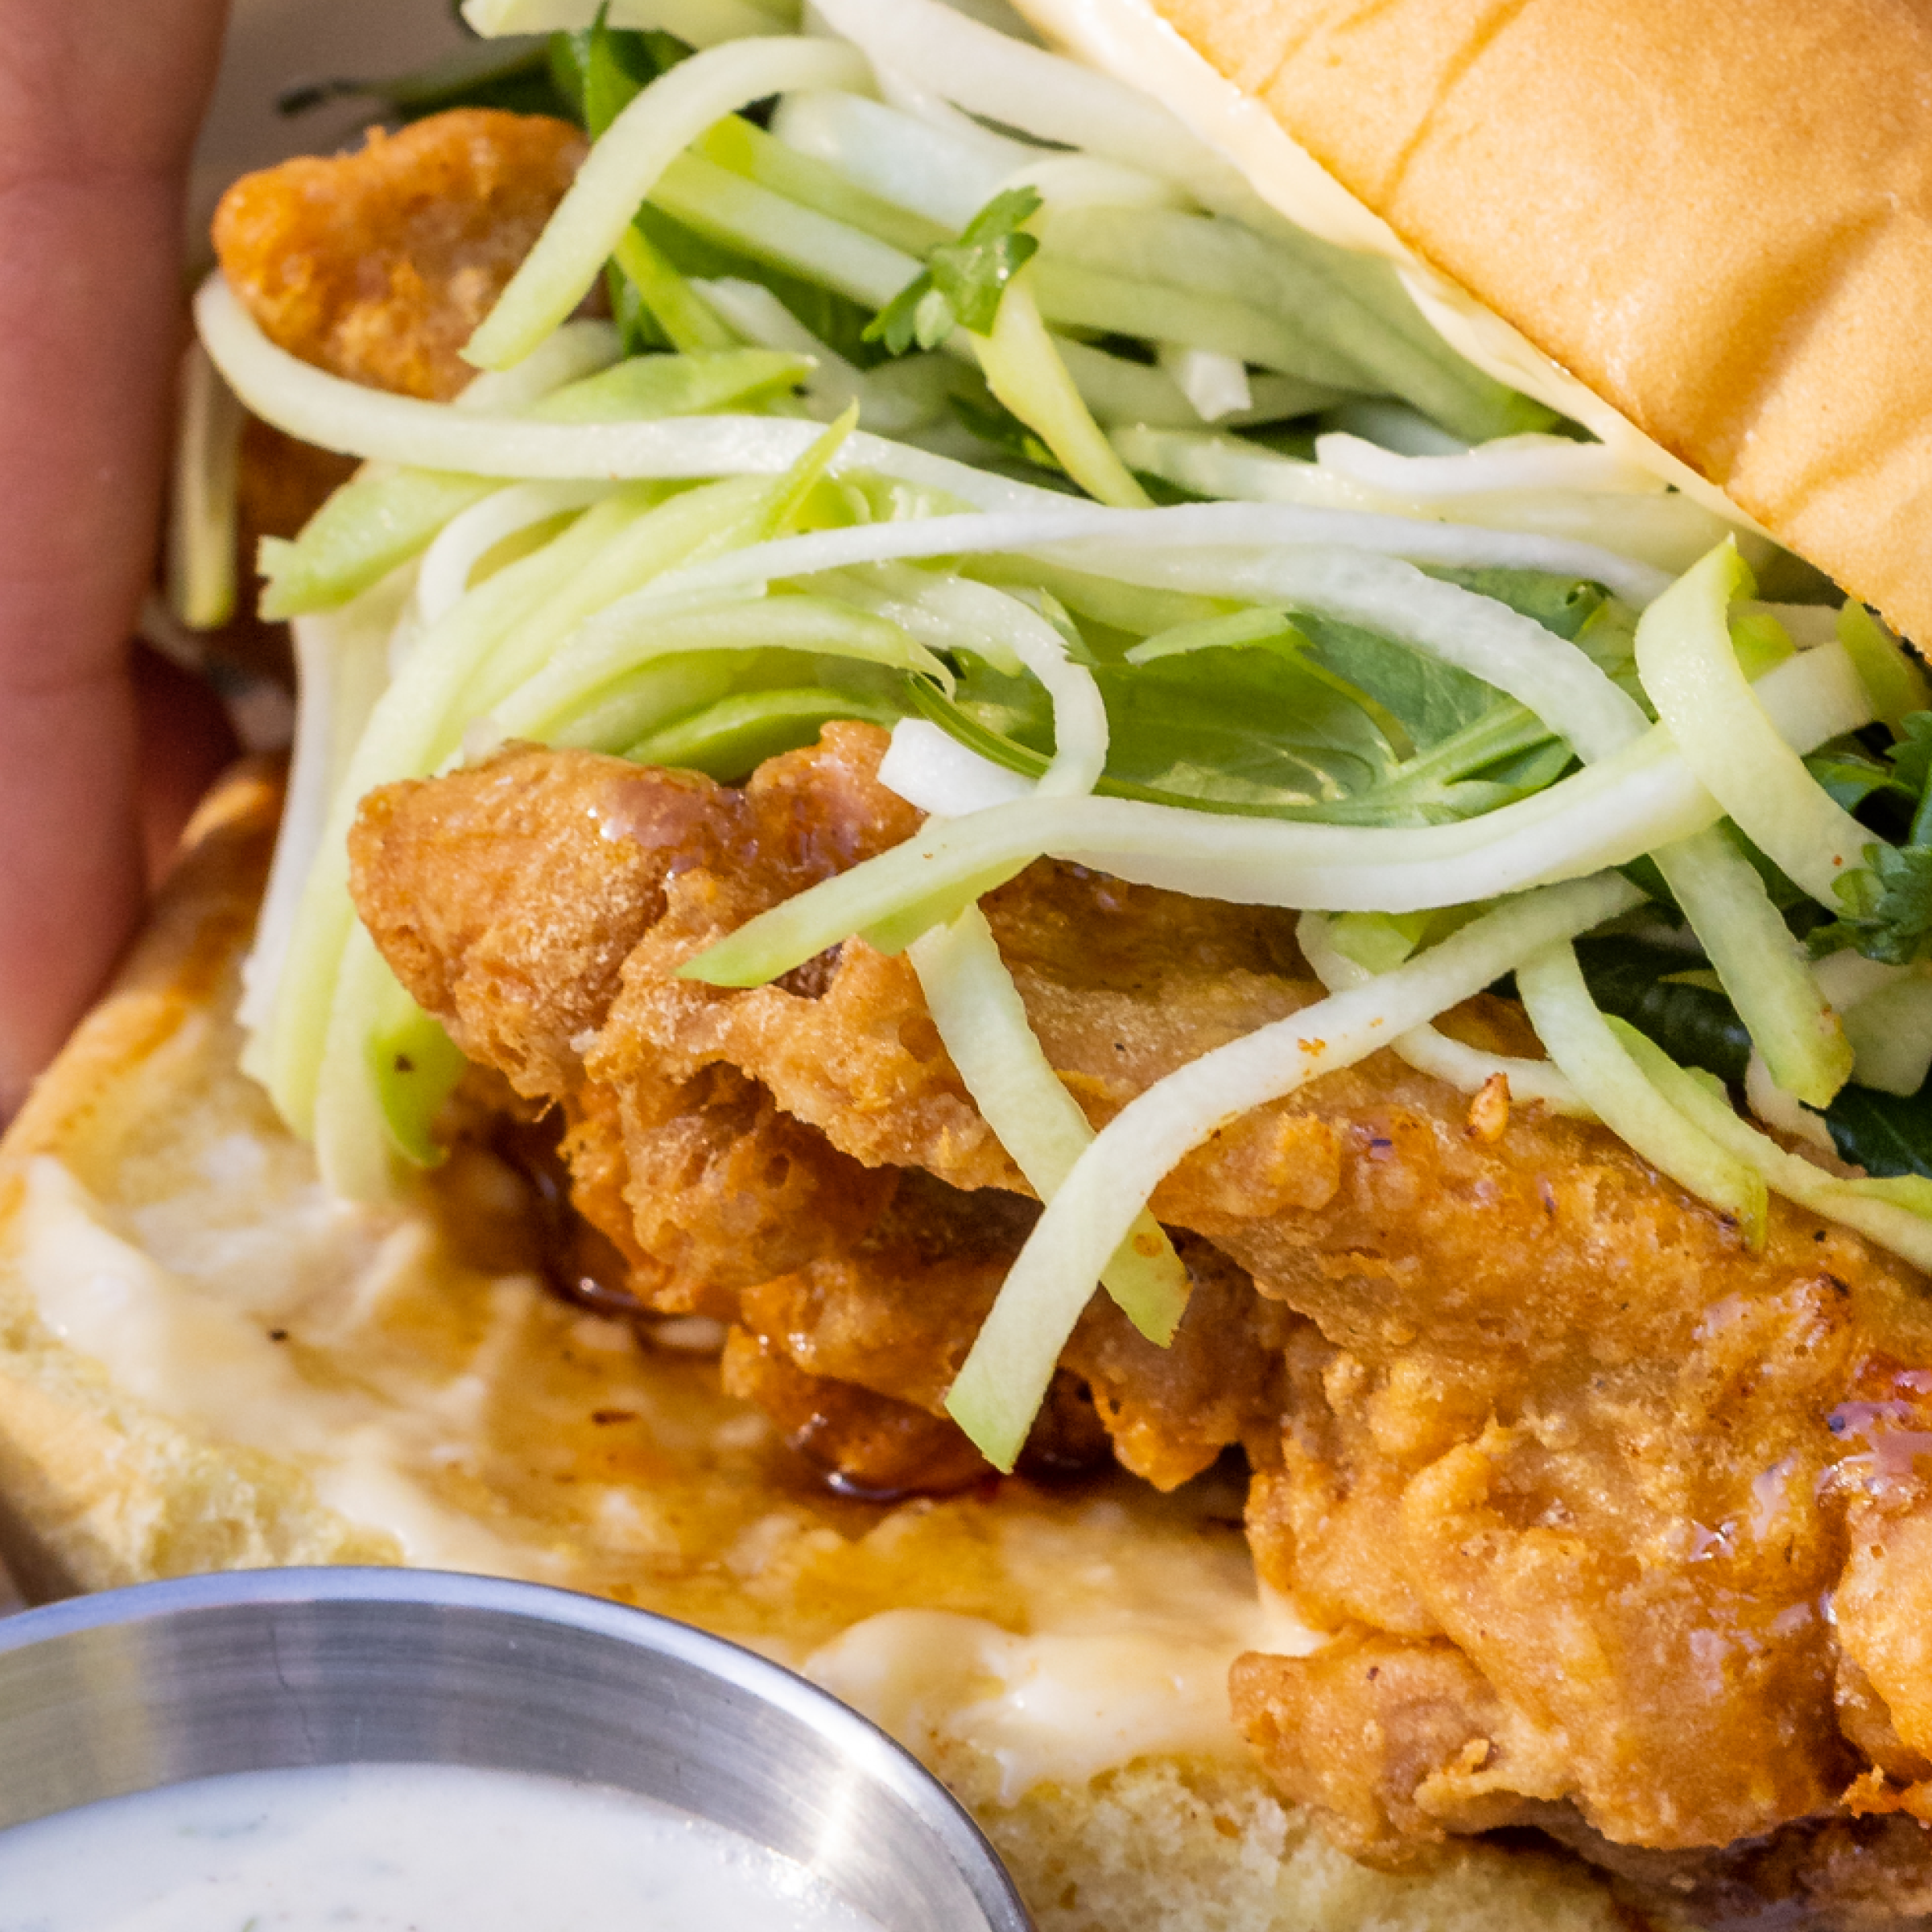 Masa Fried Chicken Sando, by Chef Balo Orozco of Sunset Cultures